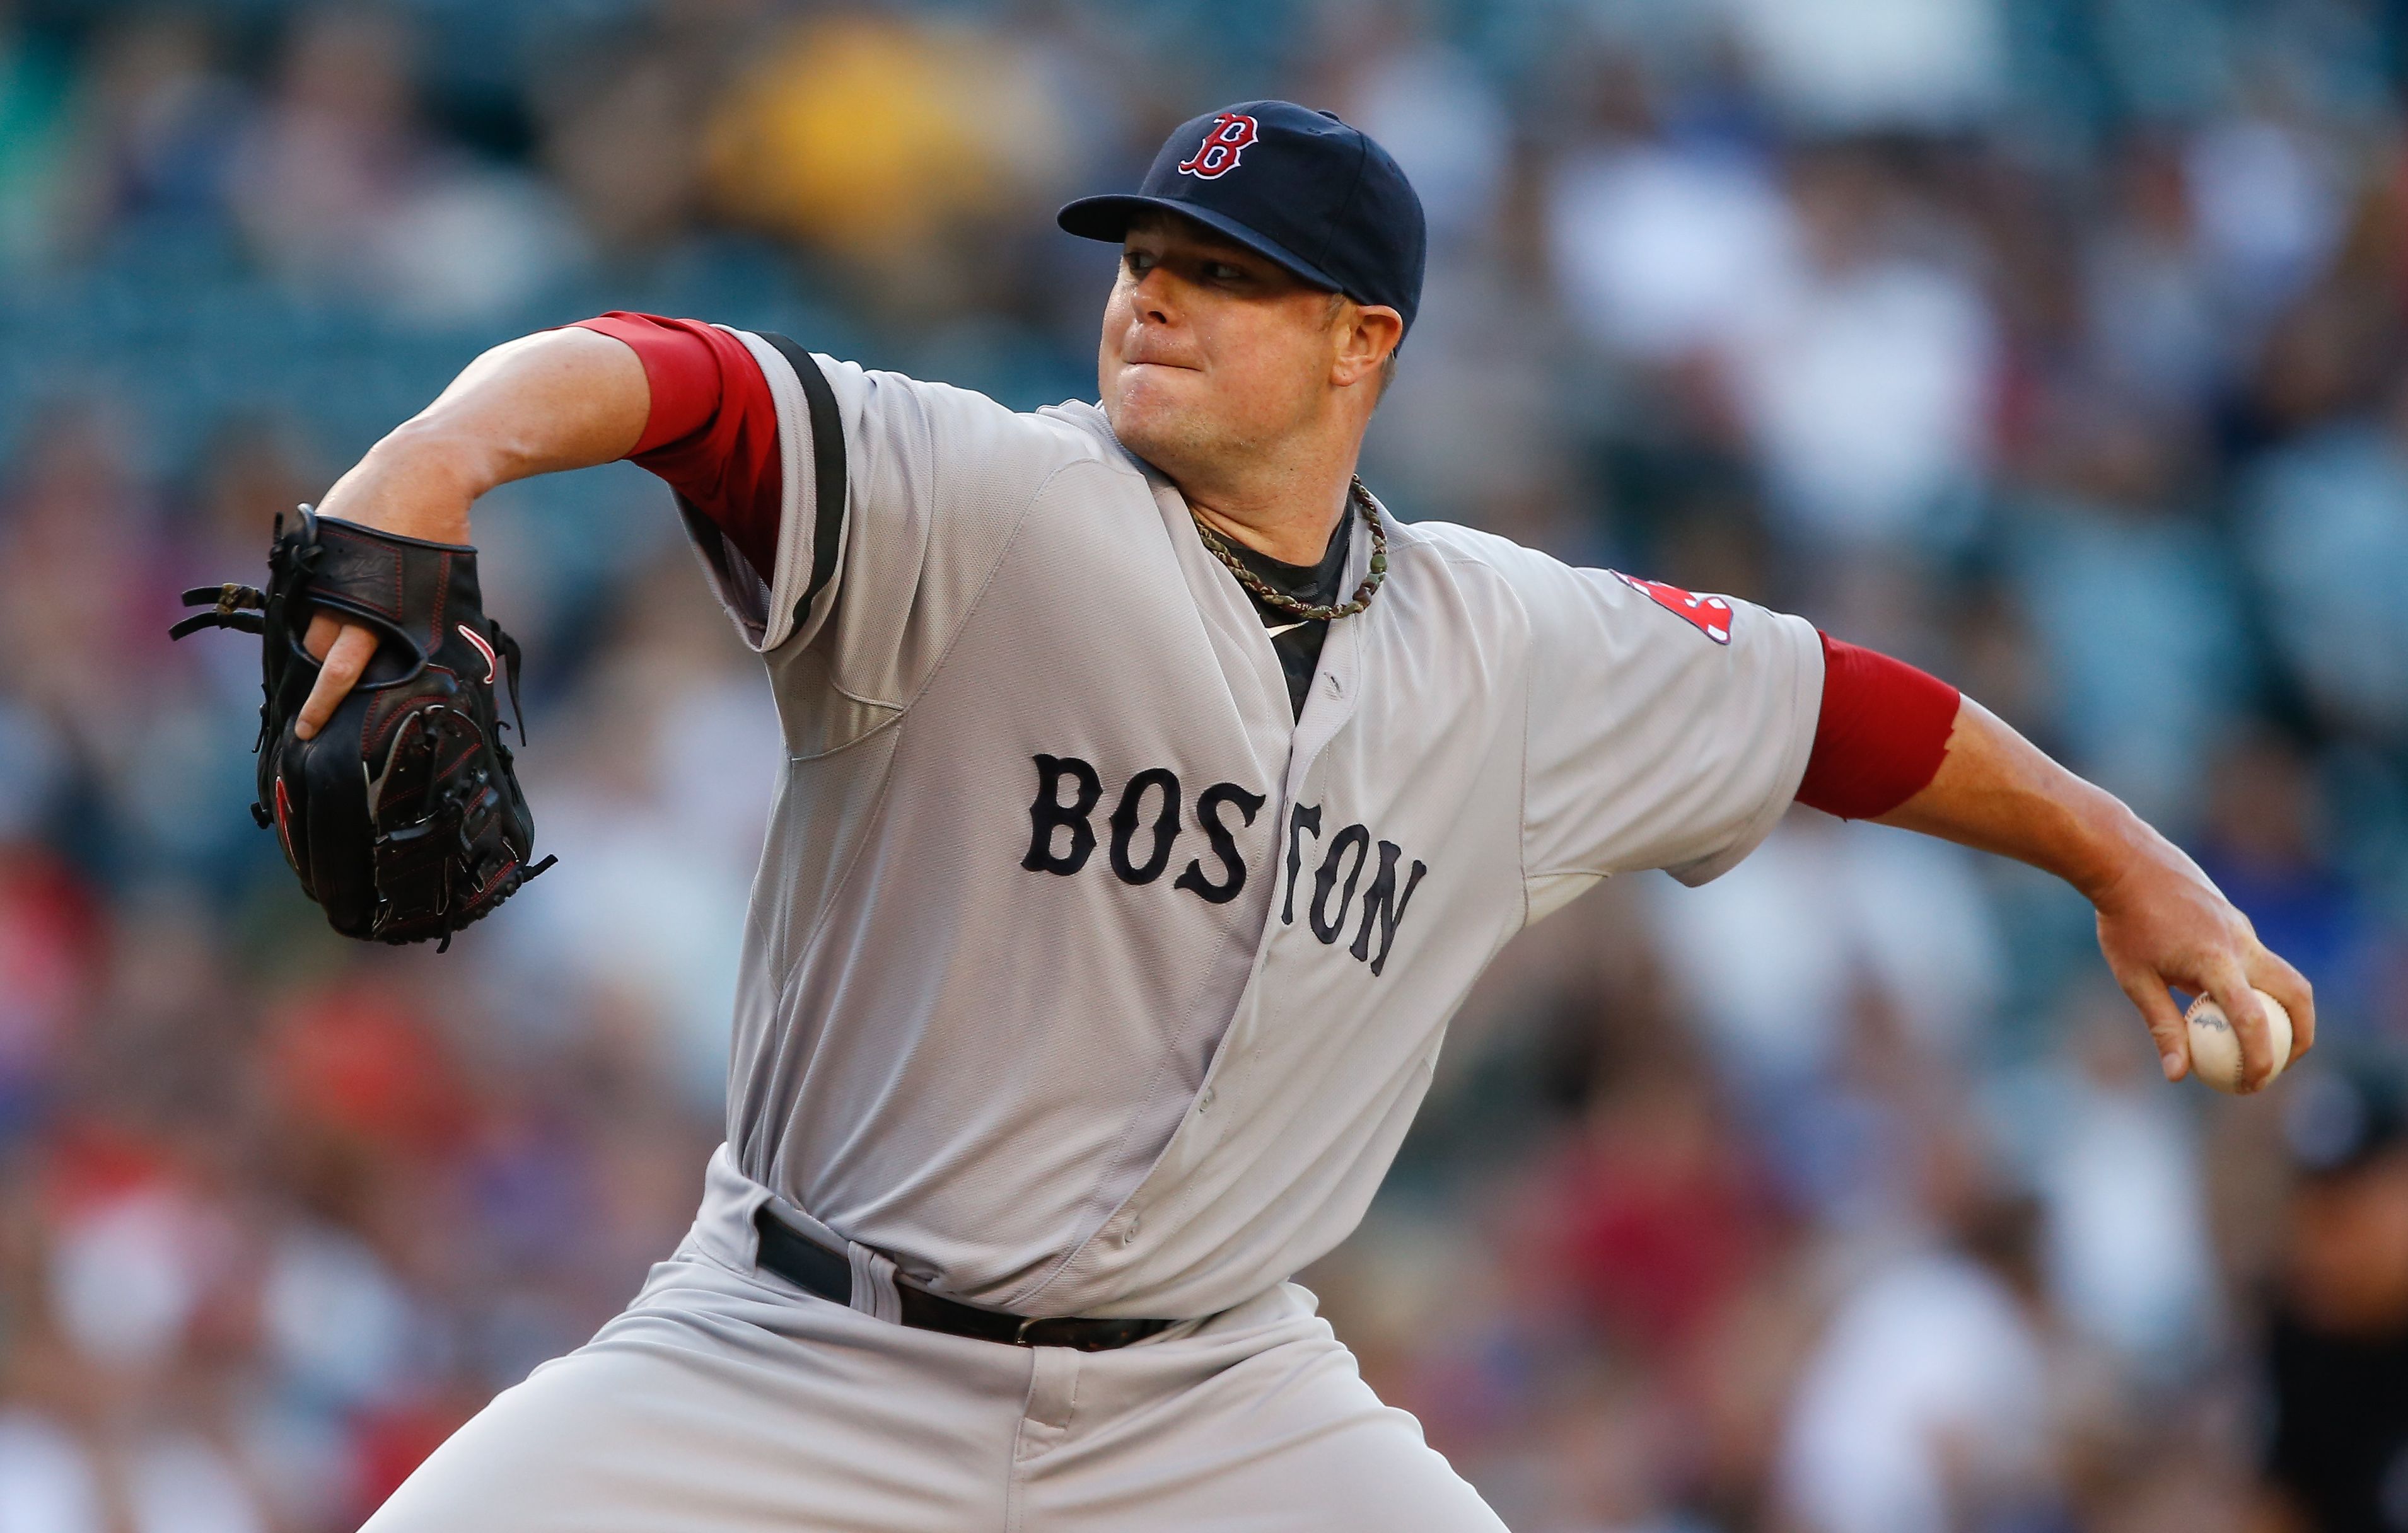 It's quite amazing how Jon Lester pitches in Game 4 of the 2007 World  Series after undergoing chemotherapy less than a year prior. : r/redsox